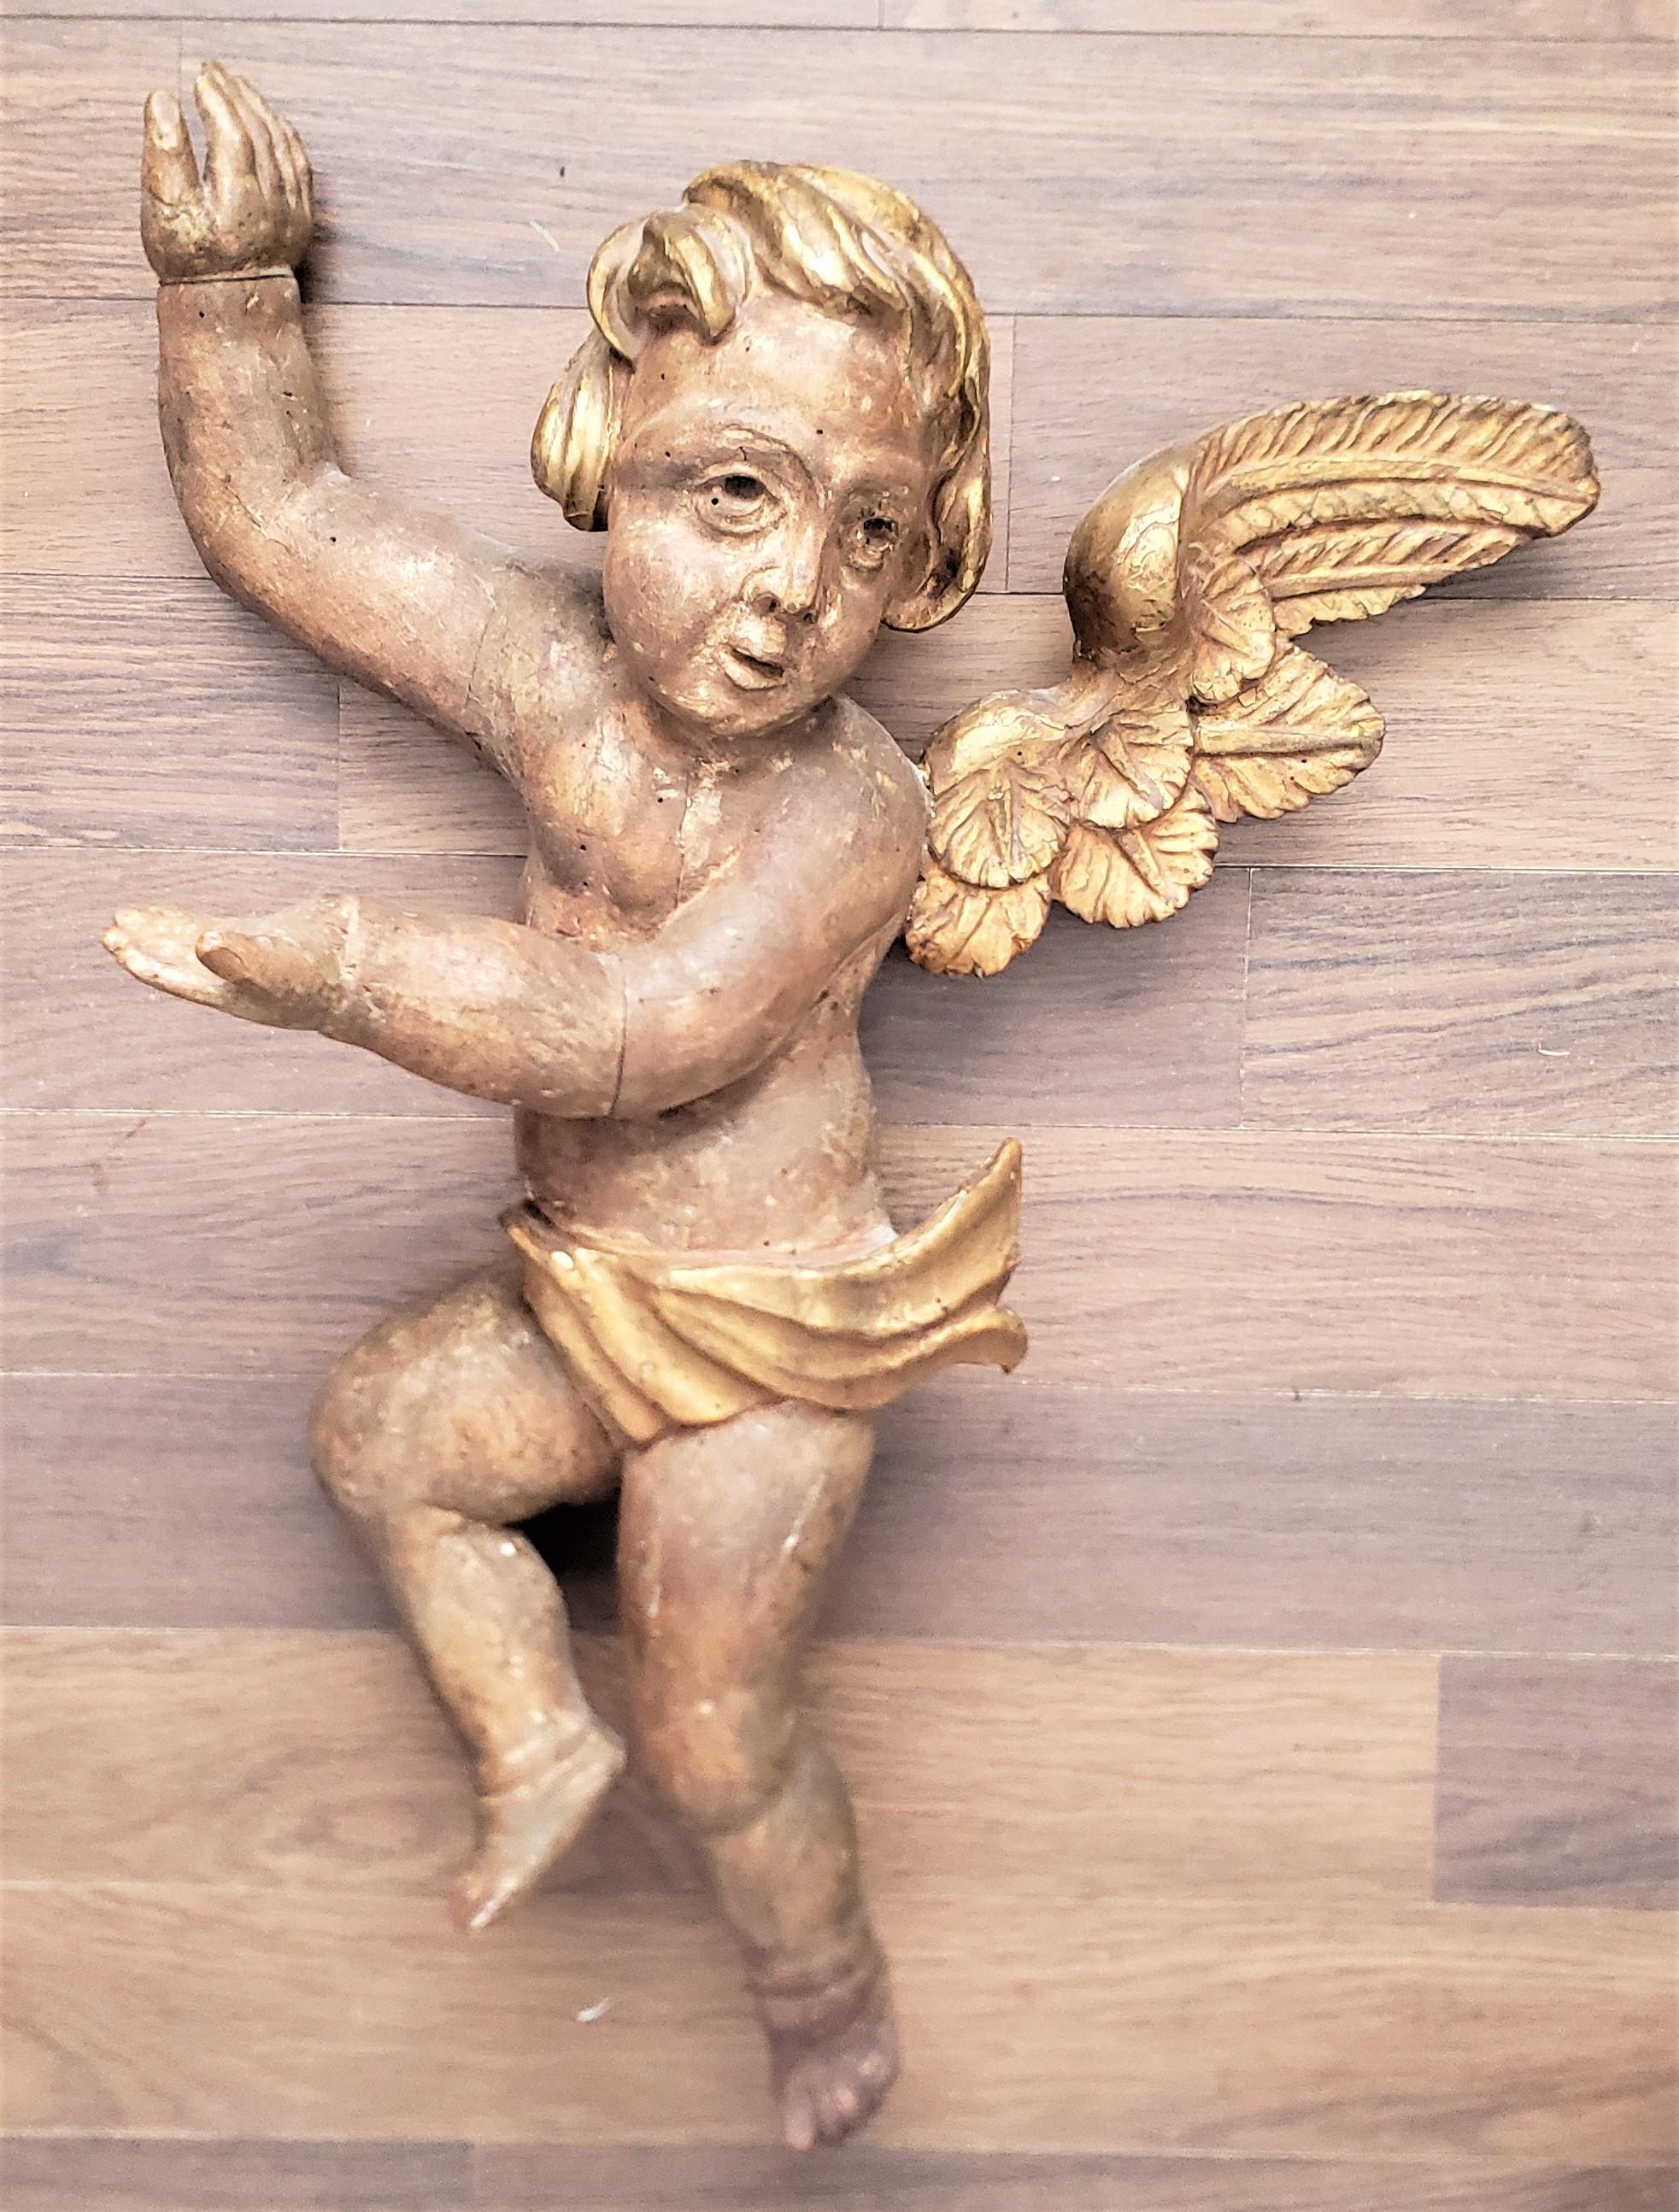 Rococo Large Antique Hand-Carved Wooden Cherub Architectural Element or Wall Sculpture For Sale